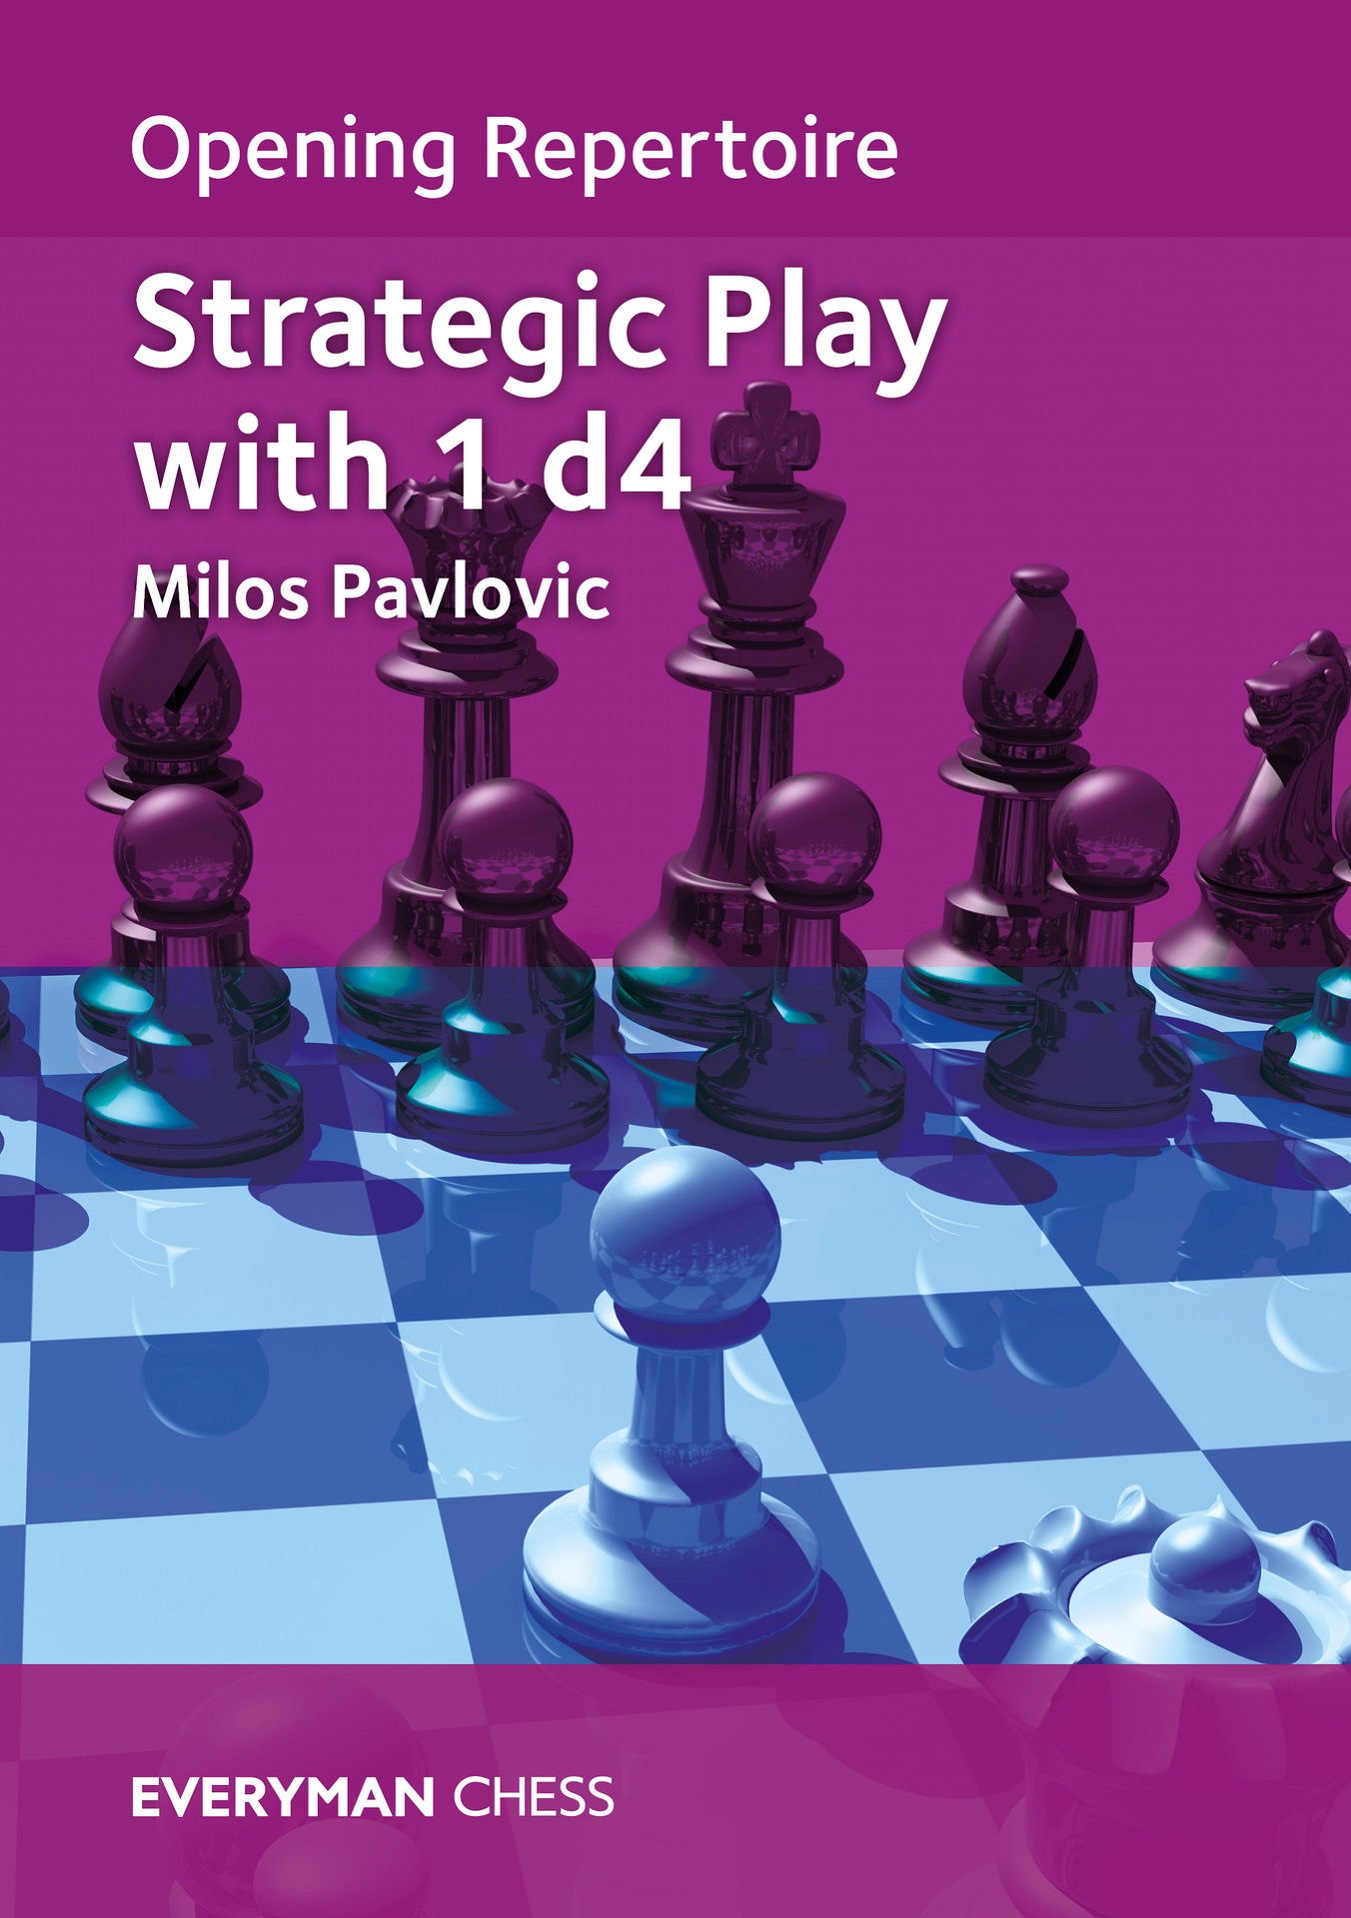 Opening Repertoire: Strategic Play with 1.d4